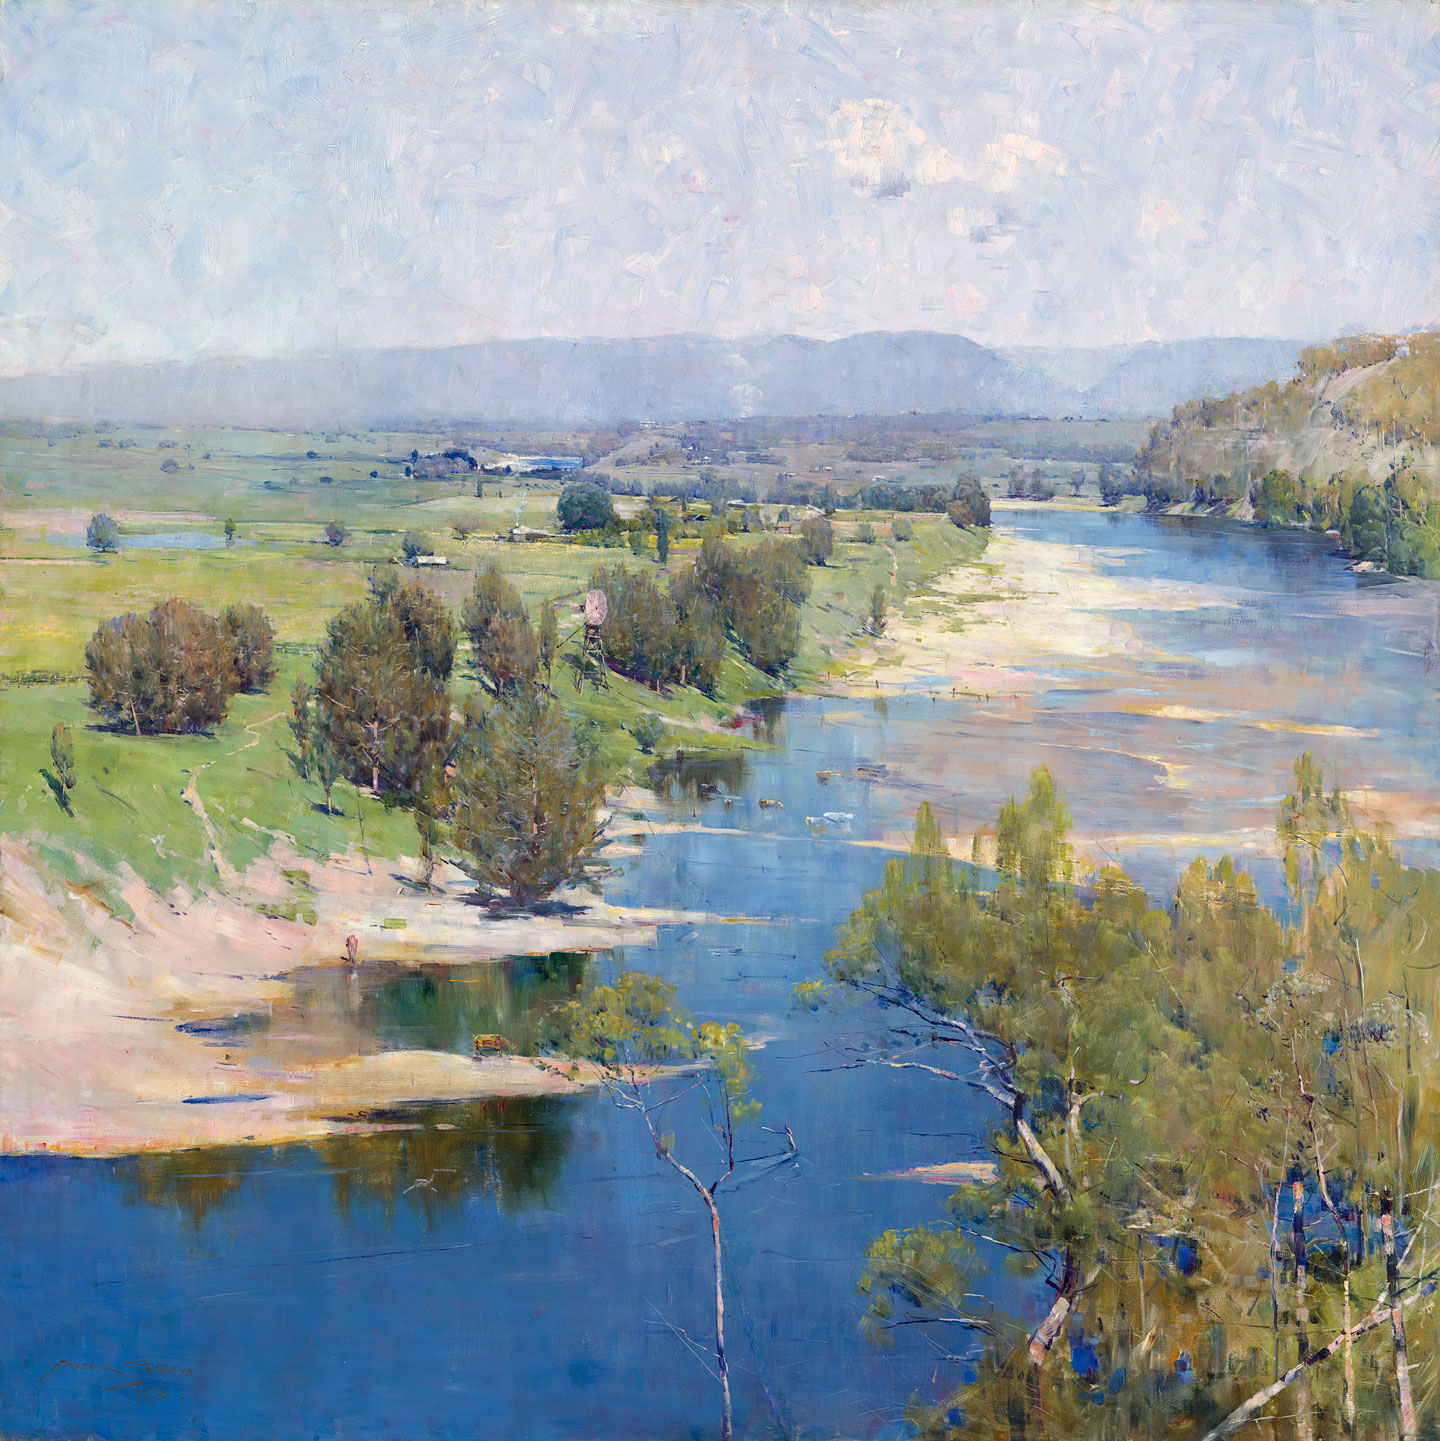 She-Oak and Sunlight at the NGV includes work by Arthur Streeton.